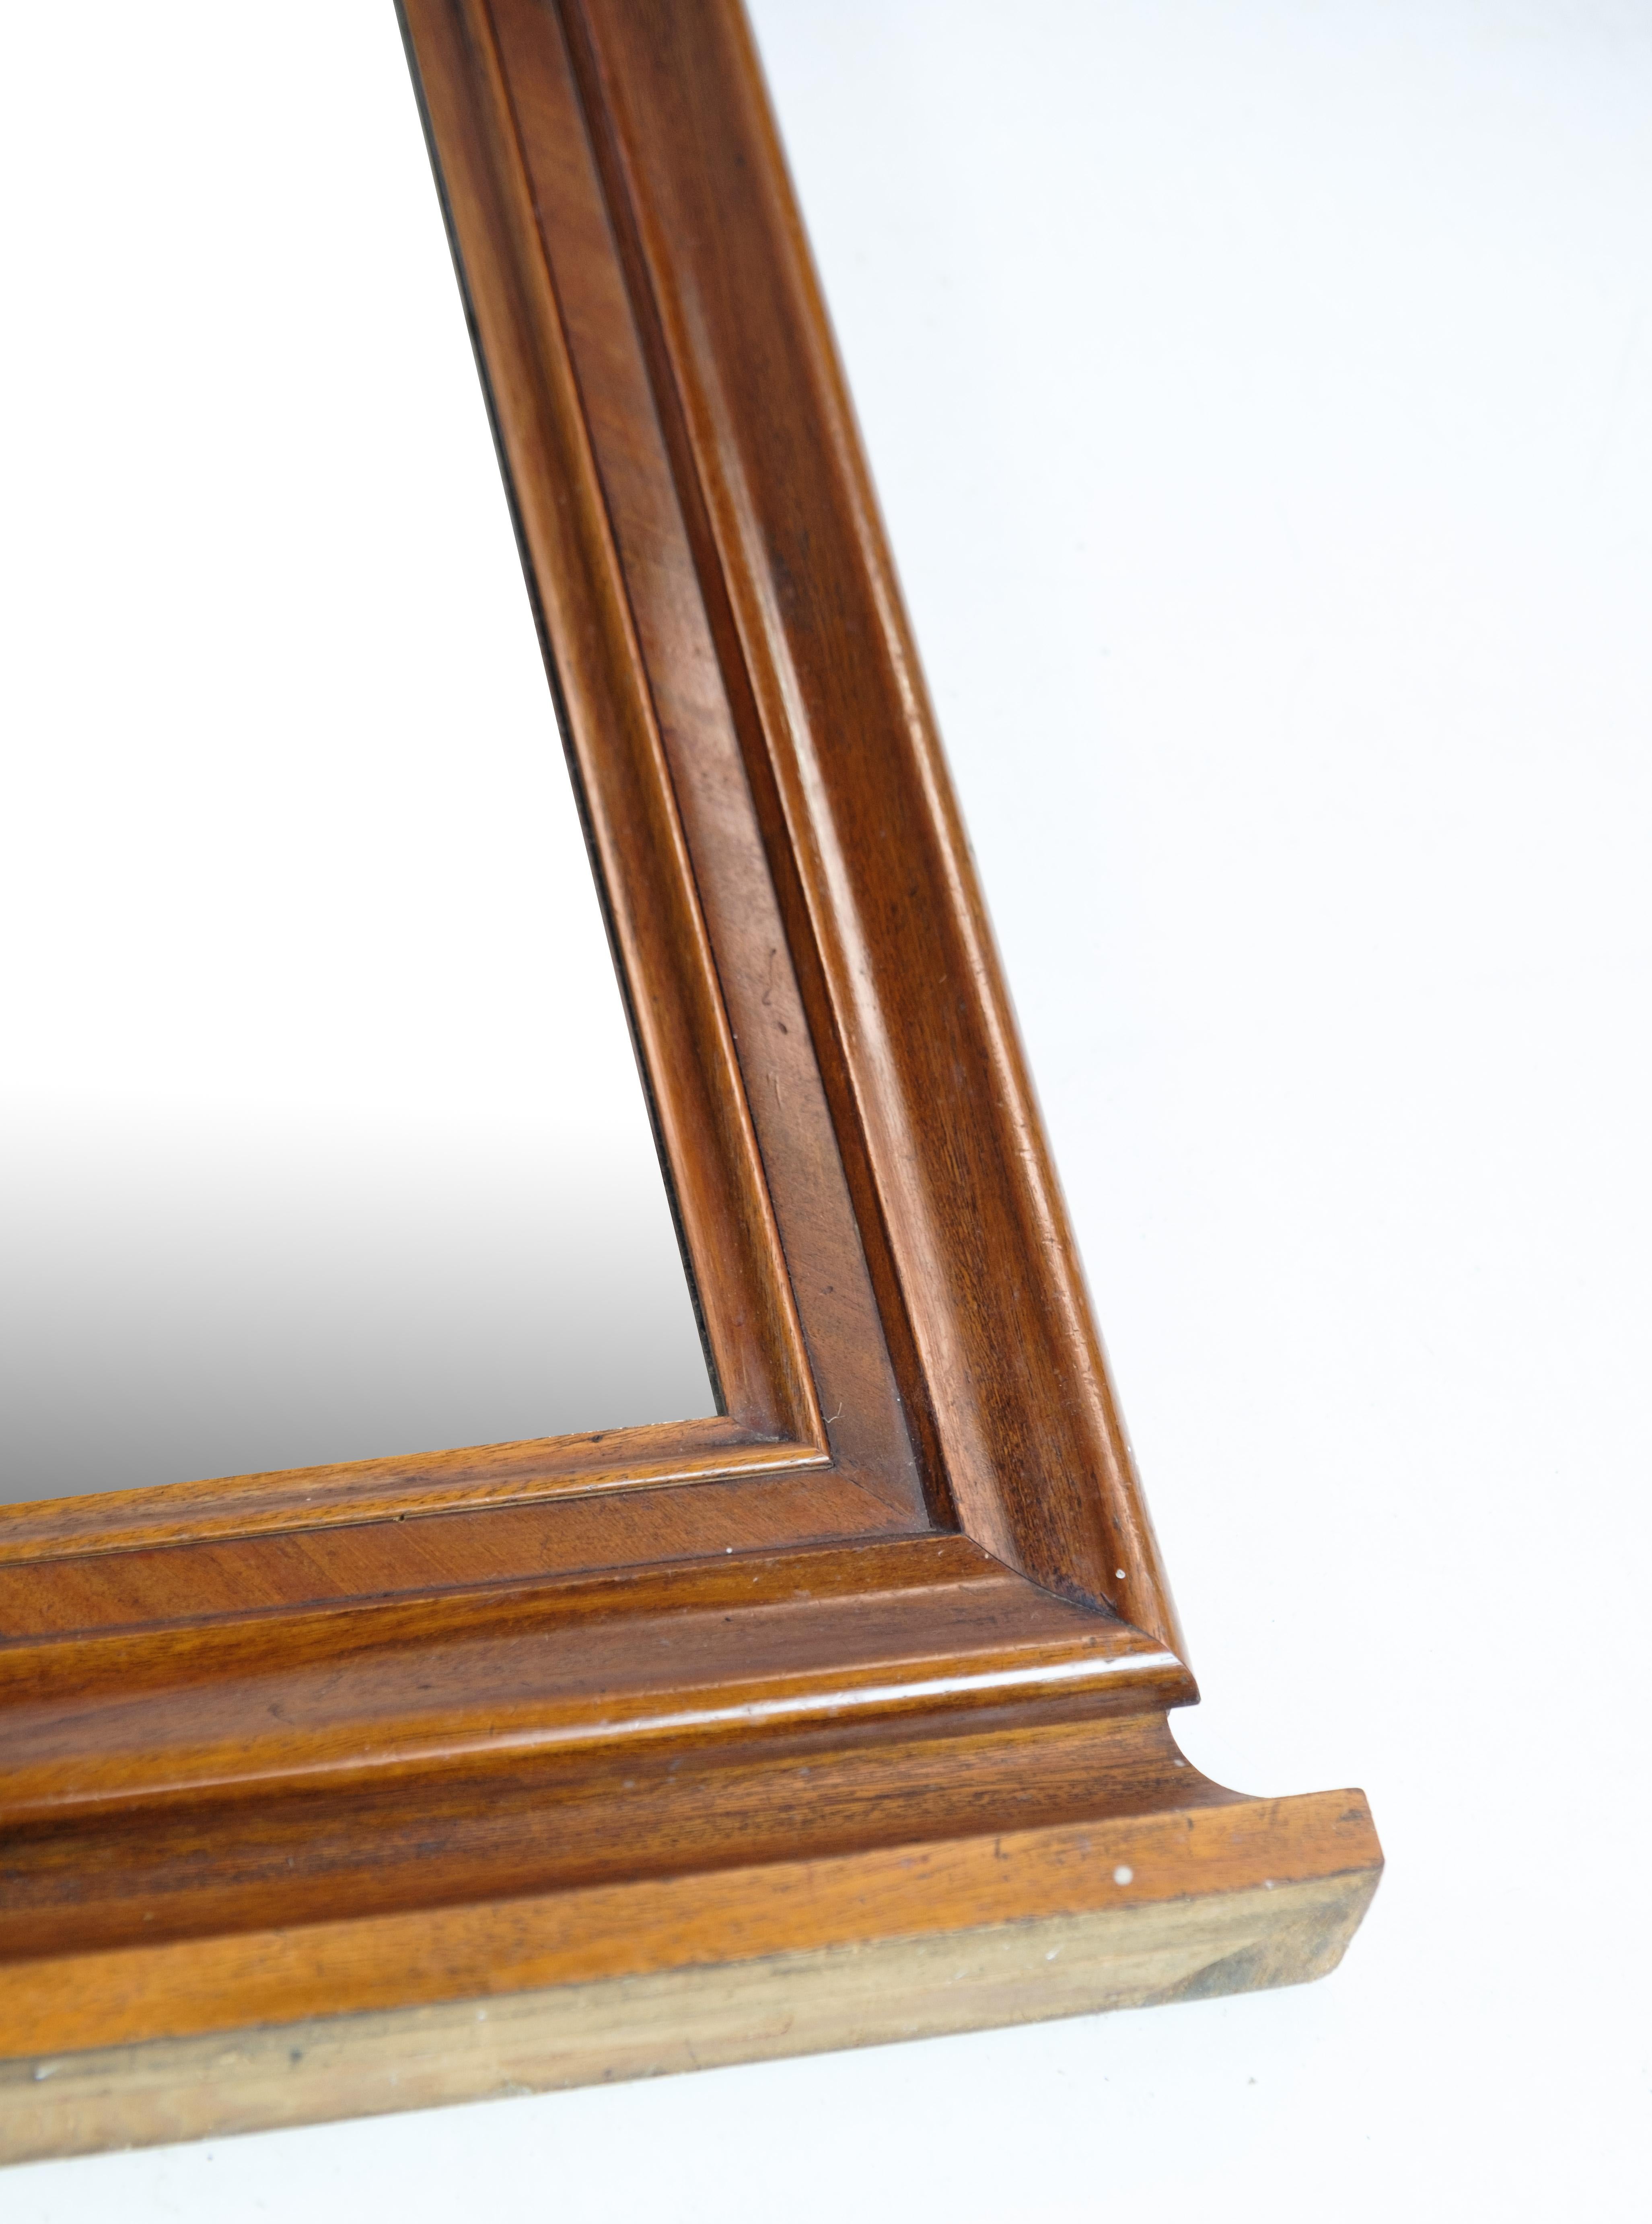 Mid-19th Century Antique Mirror in Mahogany Wood, Decorated with Carvings from Around the 1860s